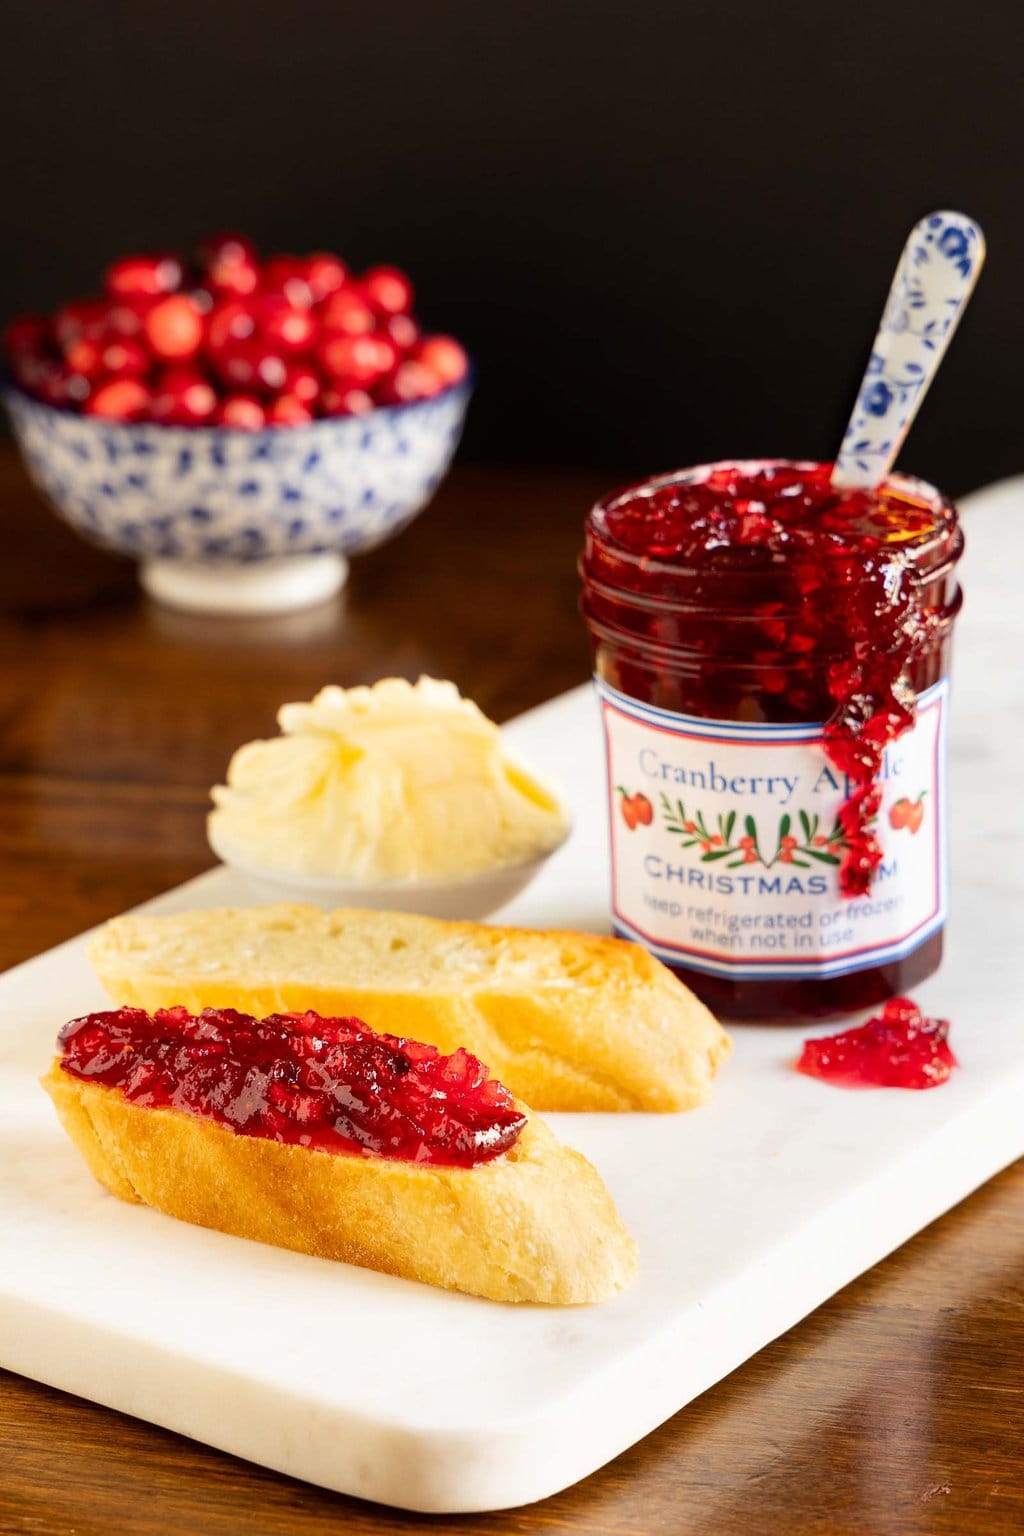 Vertical photo of a jar of Cranberry Apple Christmas Jam next to slices of bread with the jam on top.